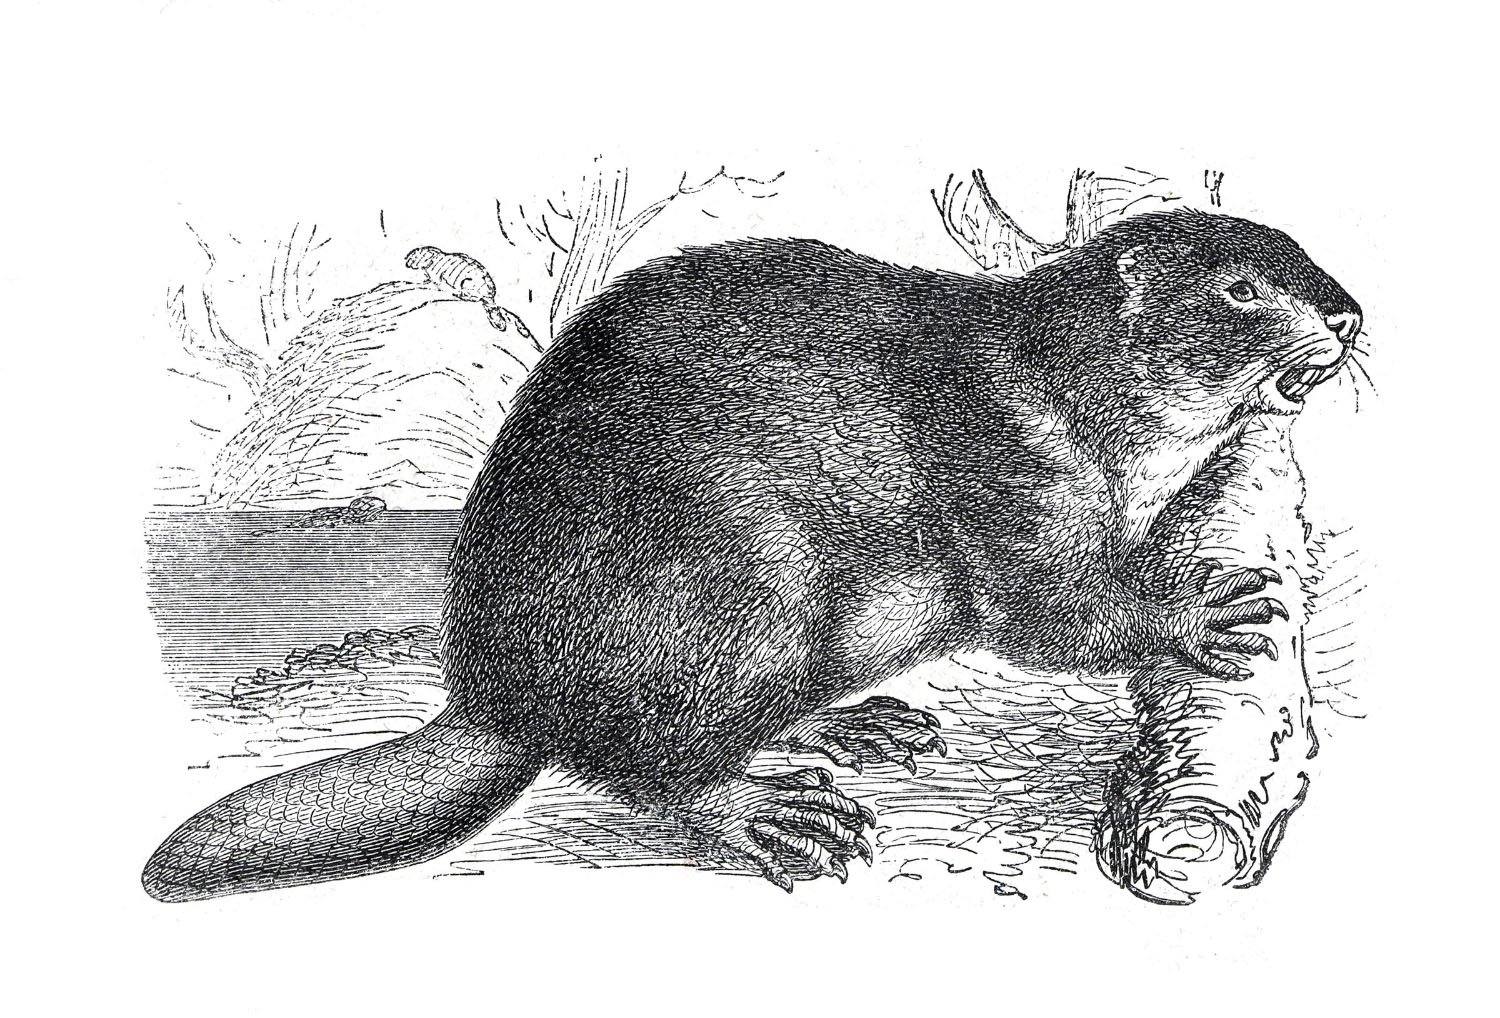 An illustration of a beaver with a log